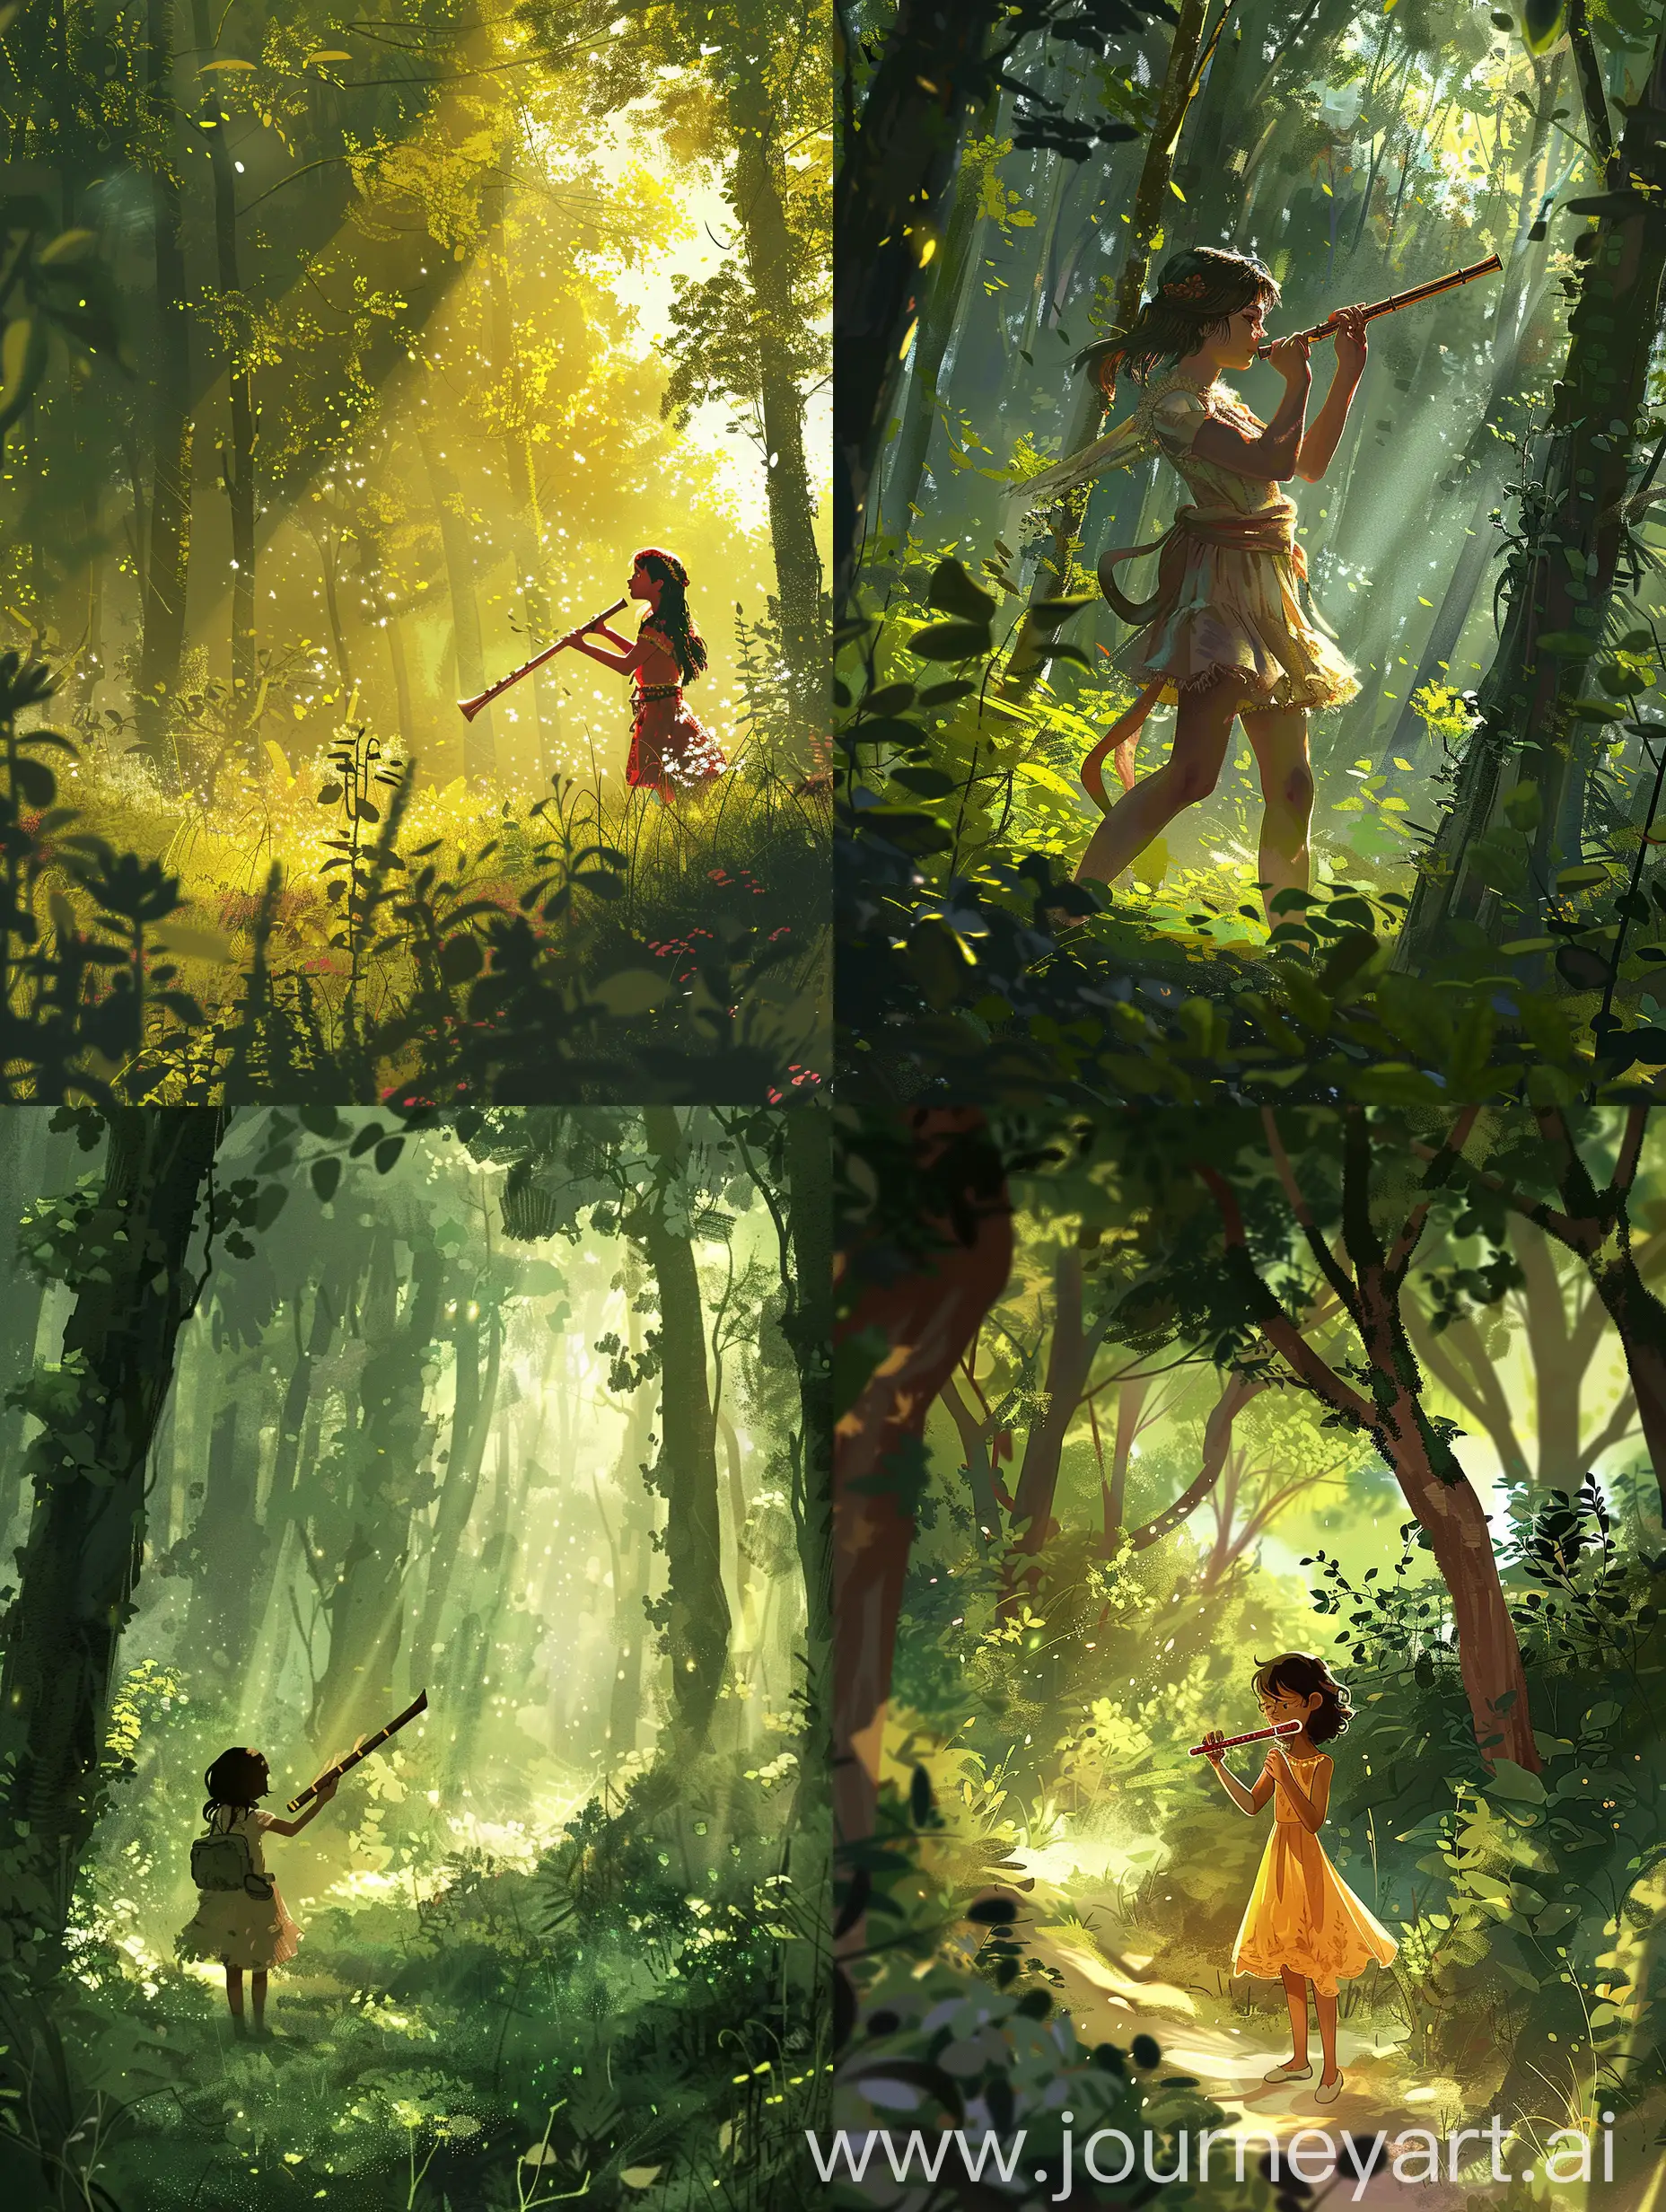 In a world where music has been forgotten, a young girl named Elara stumbles upon an ancient flute hidden deep within the silent forest. Intrigued by its melodic whispers, she sets out to restore music to her world.